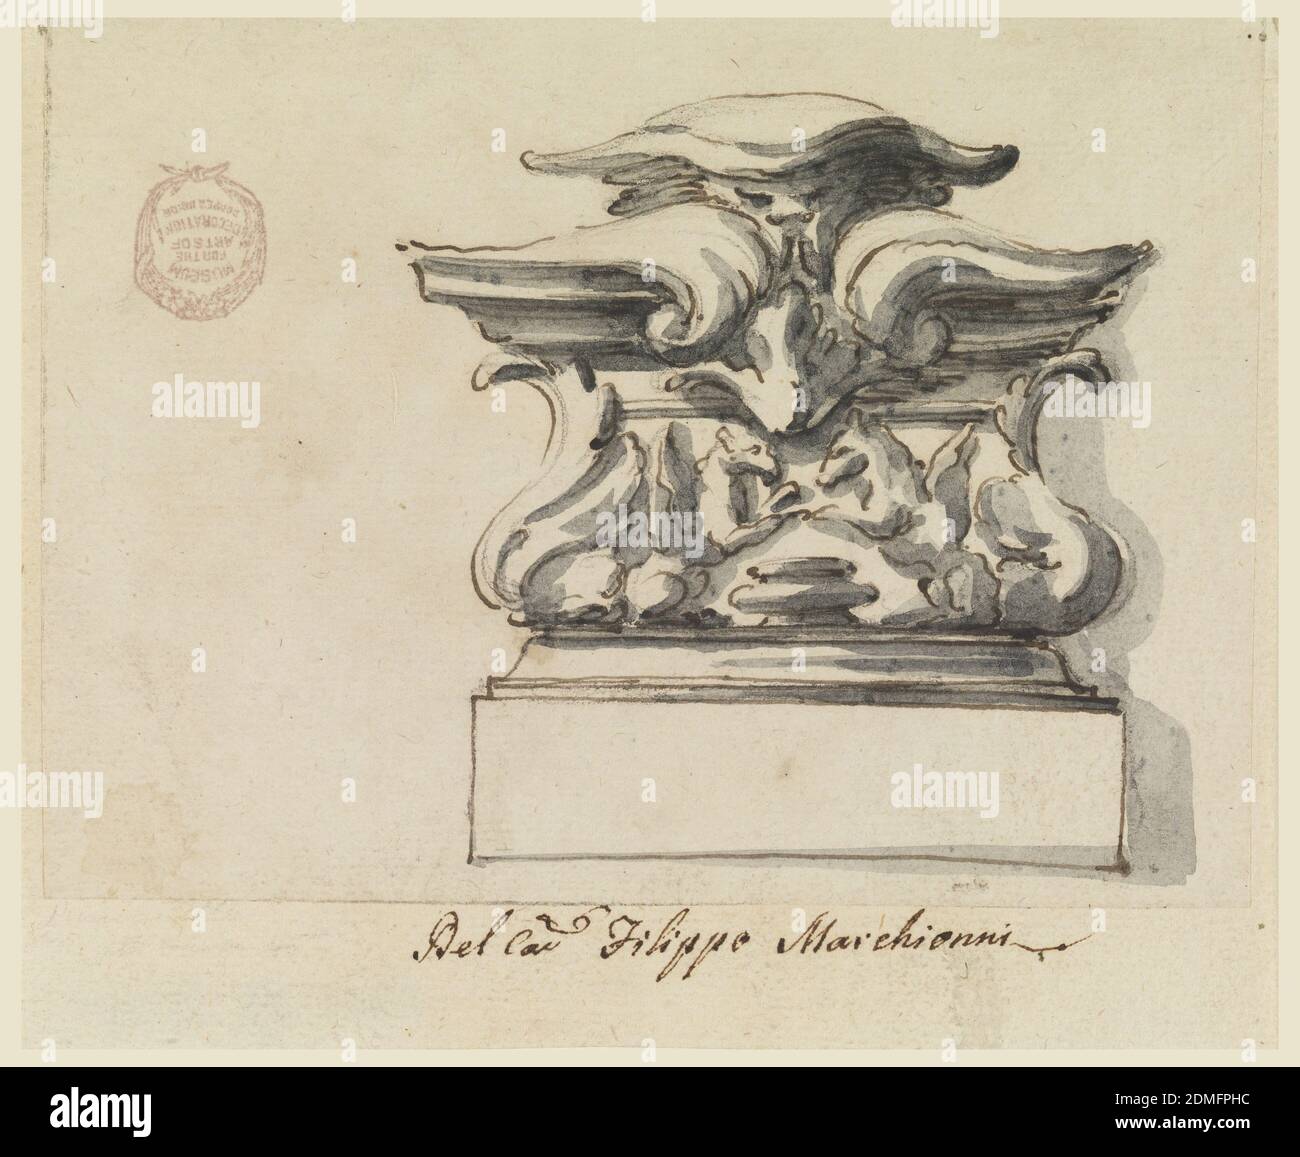 Design for an Ornament, Pen and black ink, brush and gray wash on paper, Architectural element consisting of an ornamental capital with vegetal motif on a pedestal., Italy, 1728–1778, ornament, Drawing Stock Photo